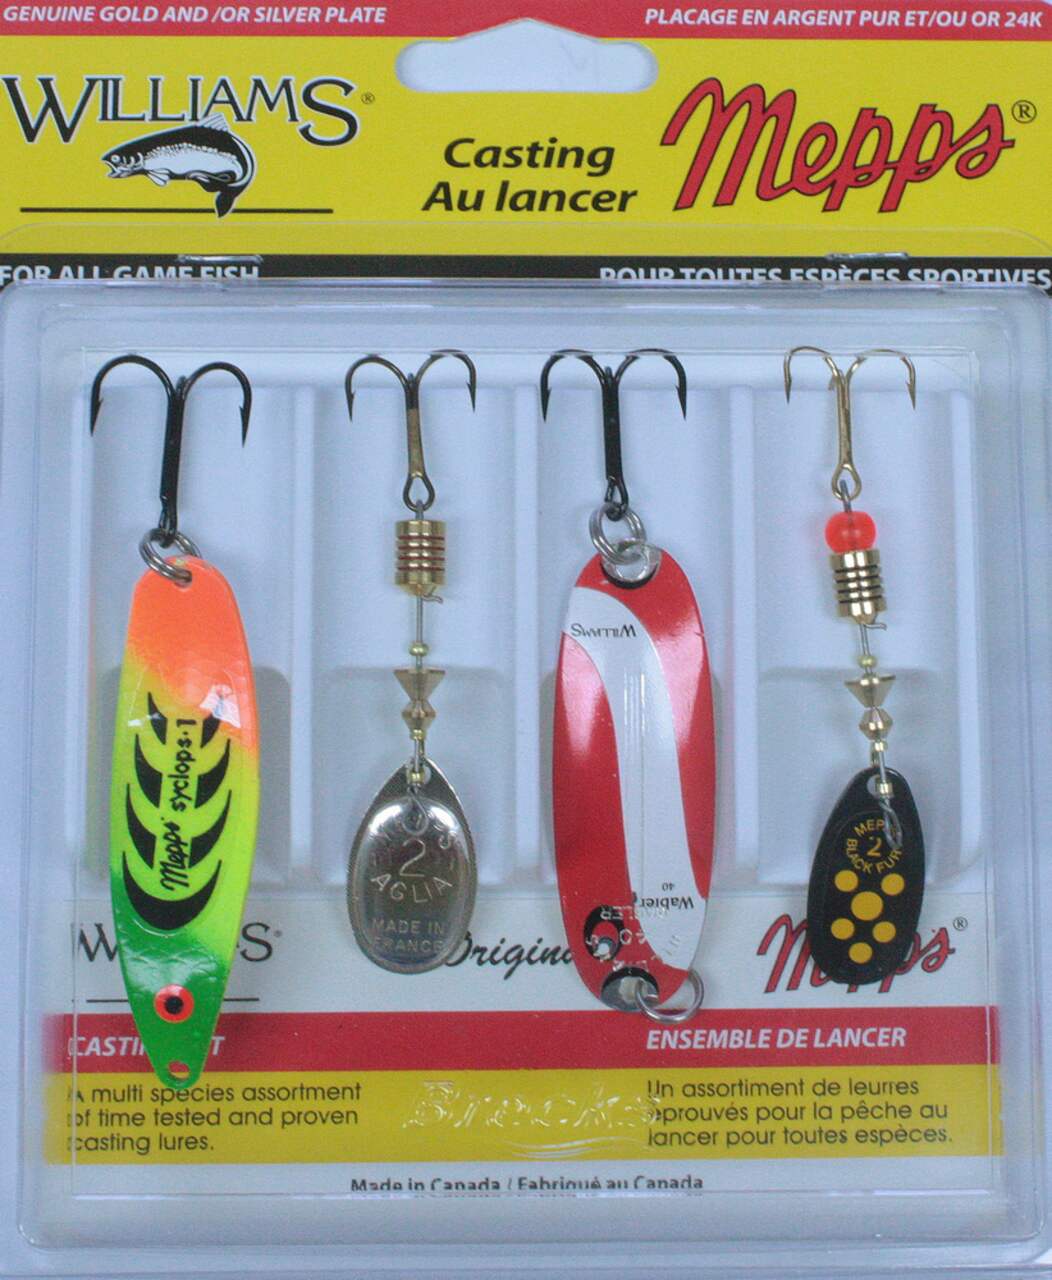 https://media-www.canadiantire.ca/product/playing/fishing/fishing-lures/0785837/small-casting-kit-4-pack-c3bf970f-056f-4c60-8e5f-41af078be85b.png?imdensity=1&imwidth=640&impolicy=mZoom